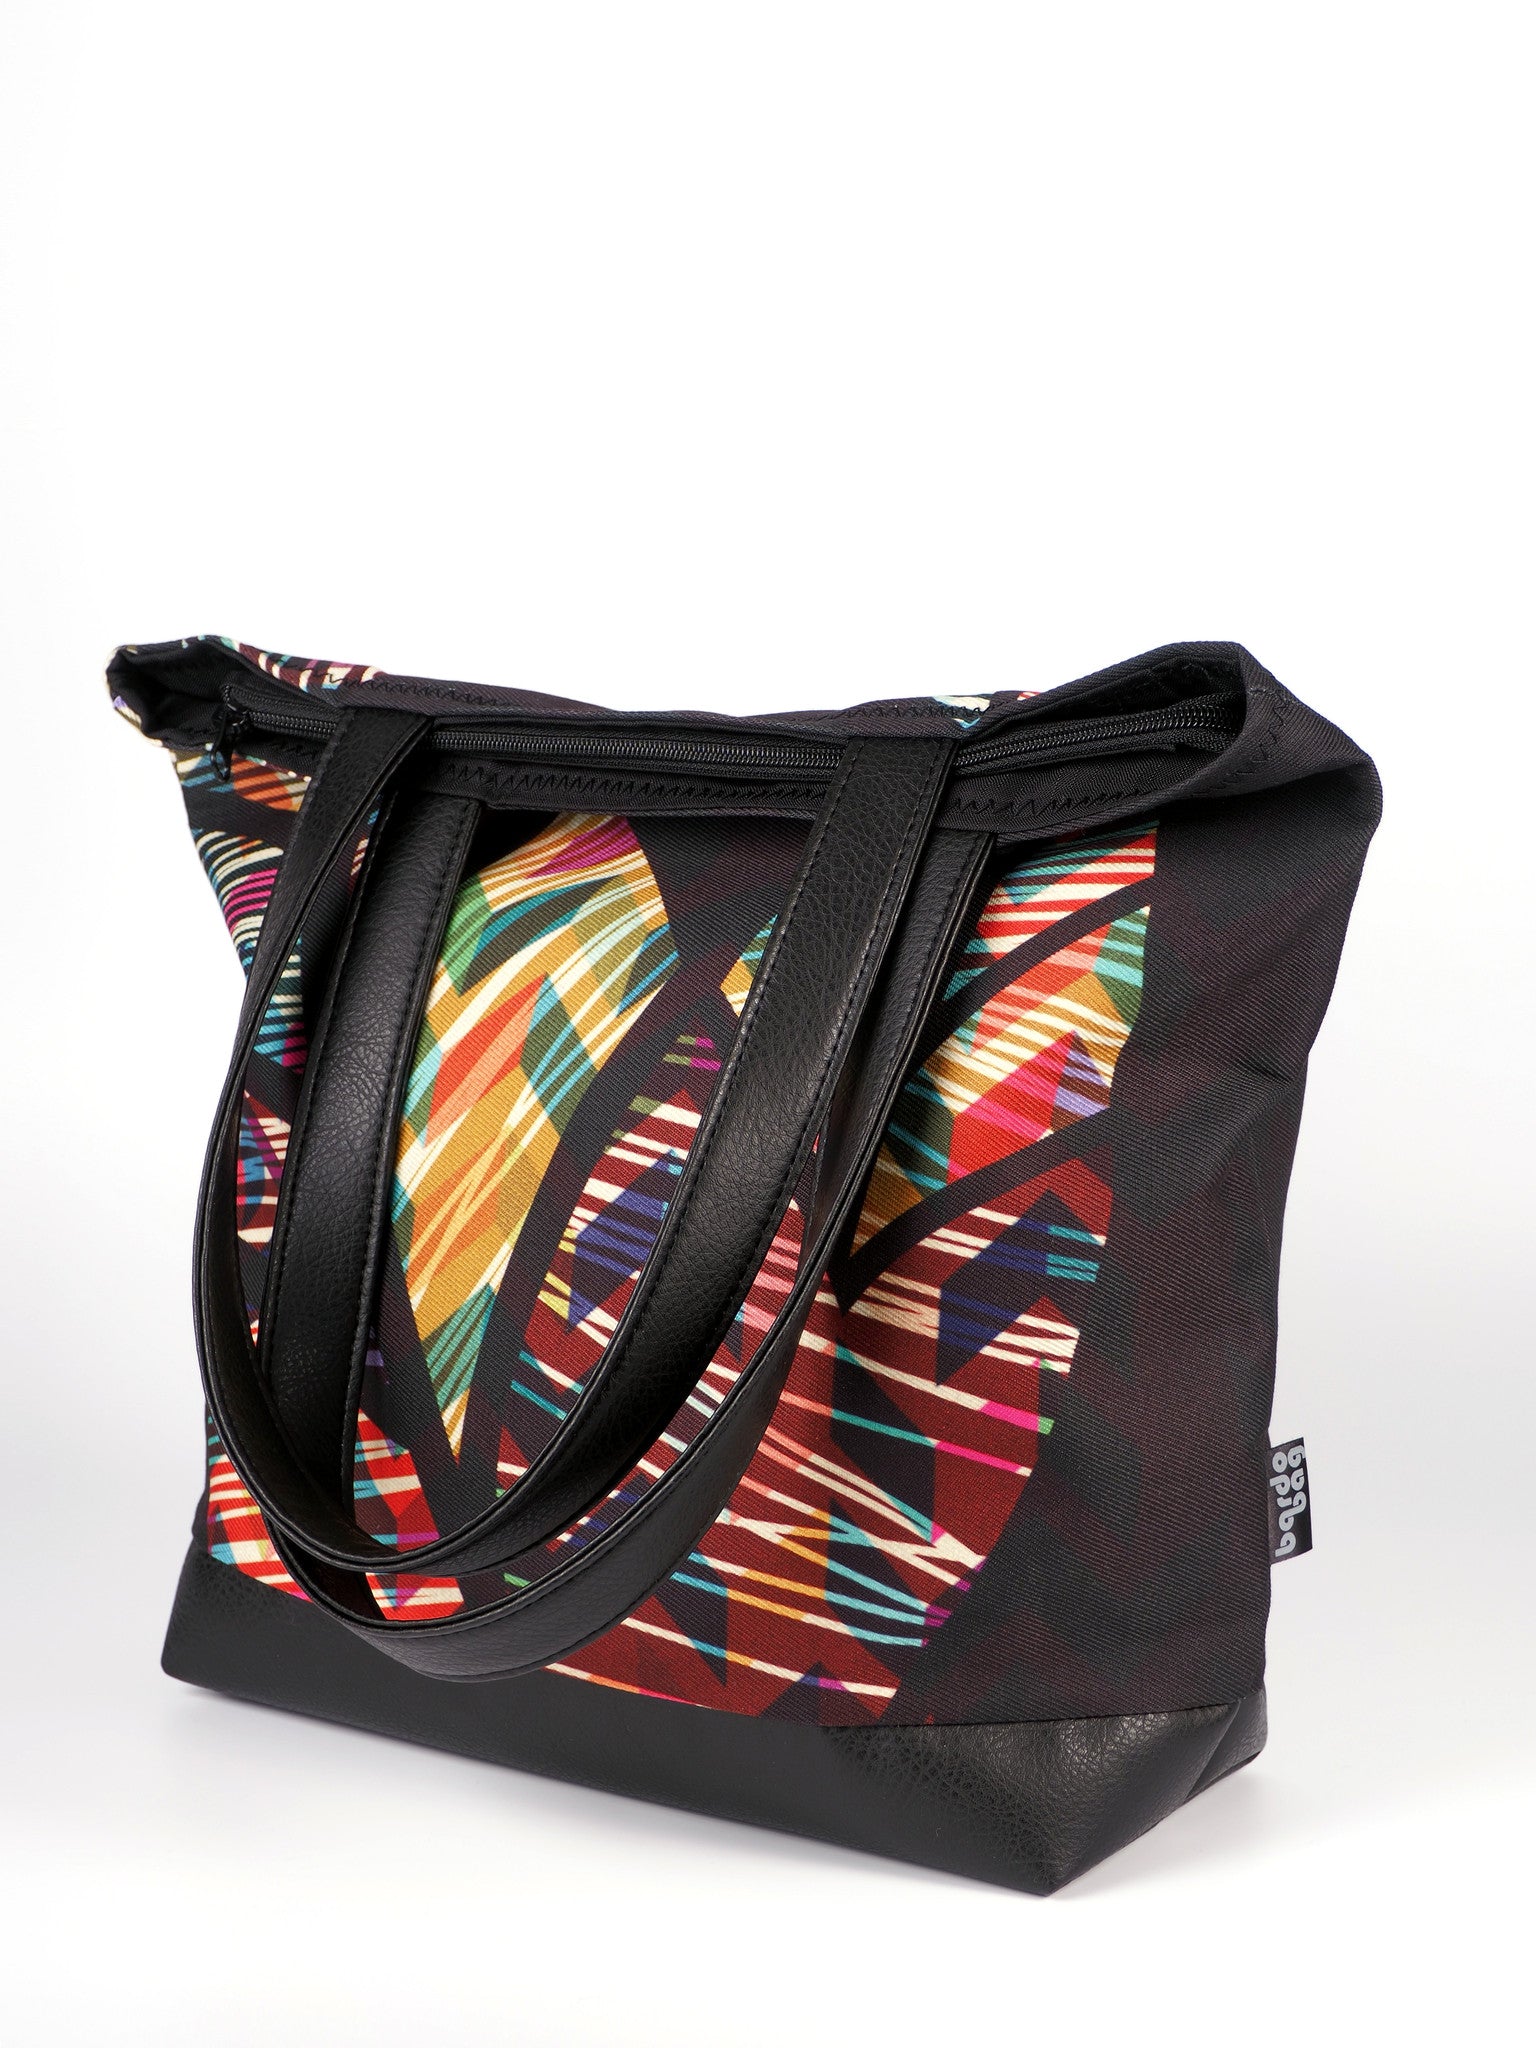 Bardo large tote bag - Оne whole - Premium large tote bag from Bardo bag - Just lvabstract, black, blue, dark blue, floral, gift, green, handemade, nature, purple, red, tablet, tote bag, vegan leather, woman, work tote bag, yellow89.00! Shop now at BARDO ART WORKS